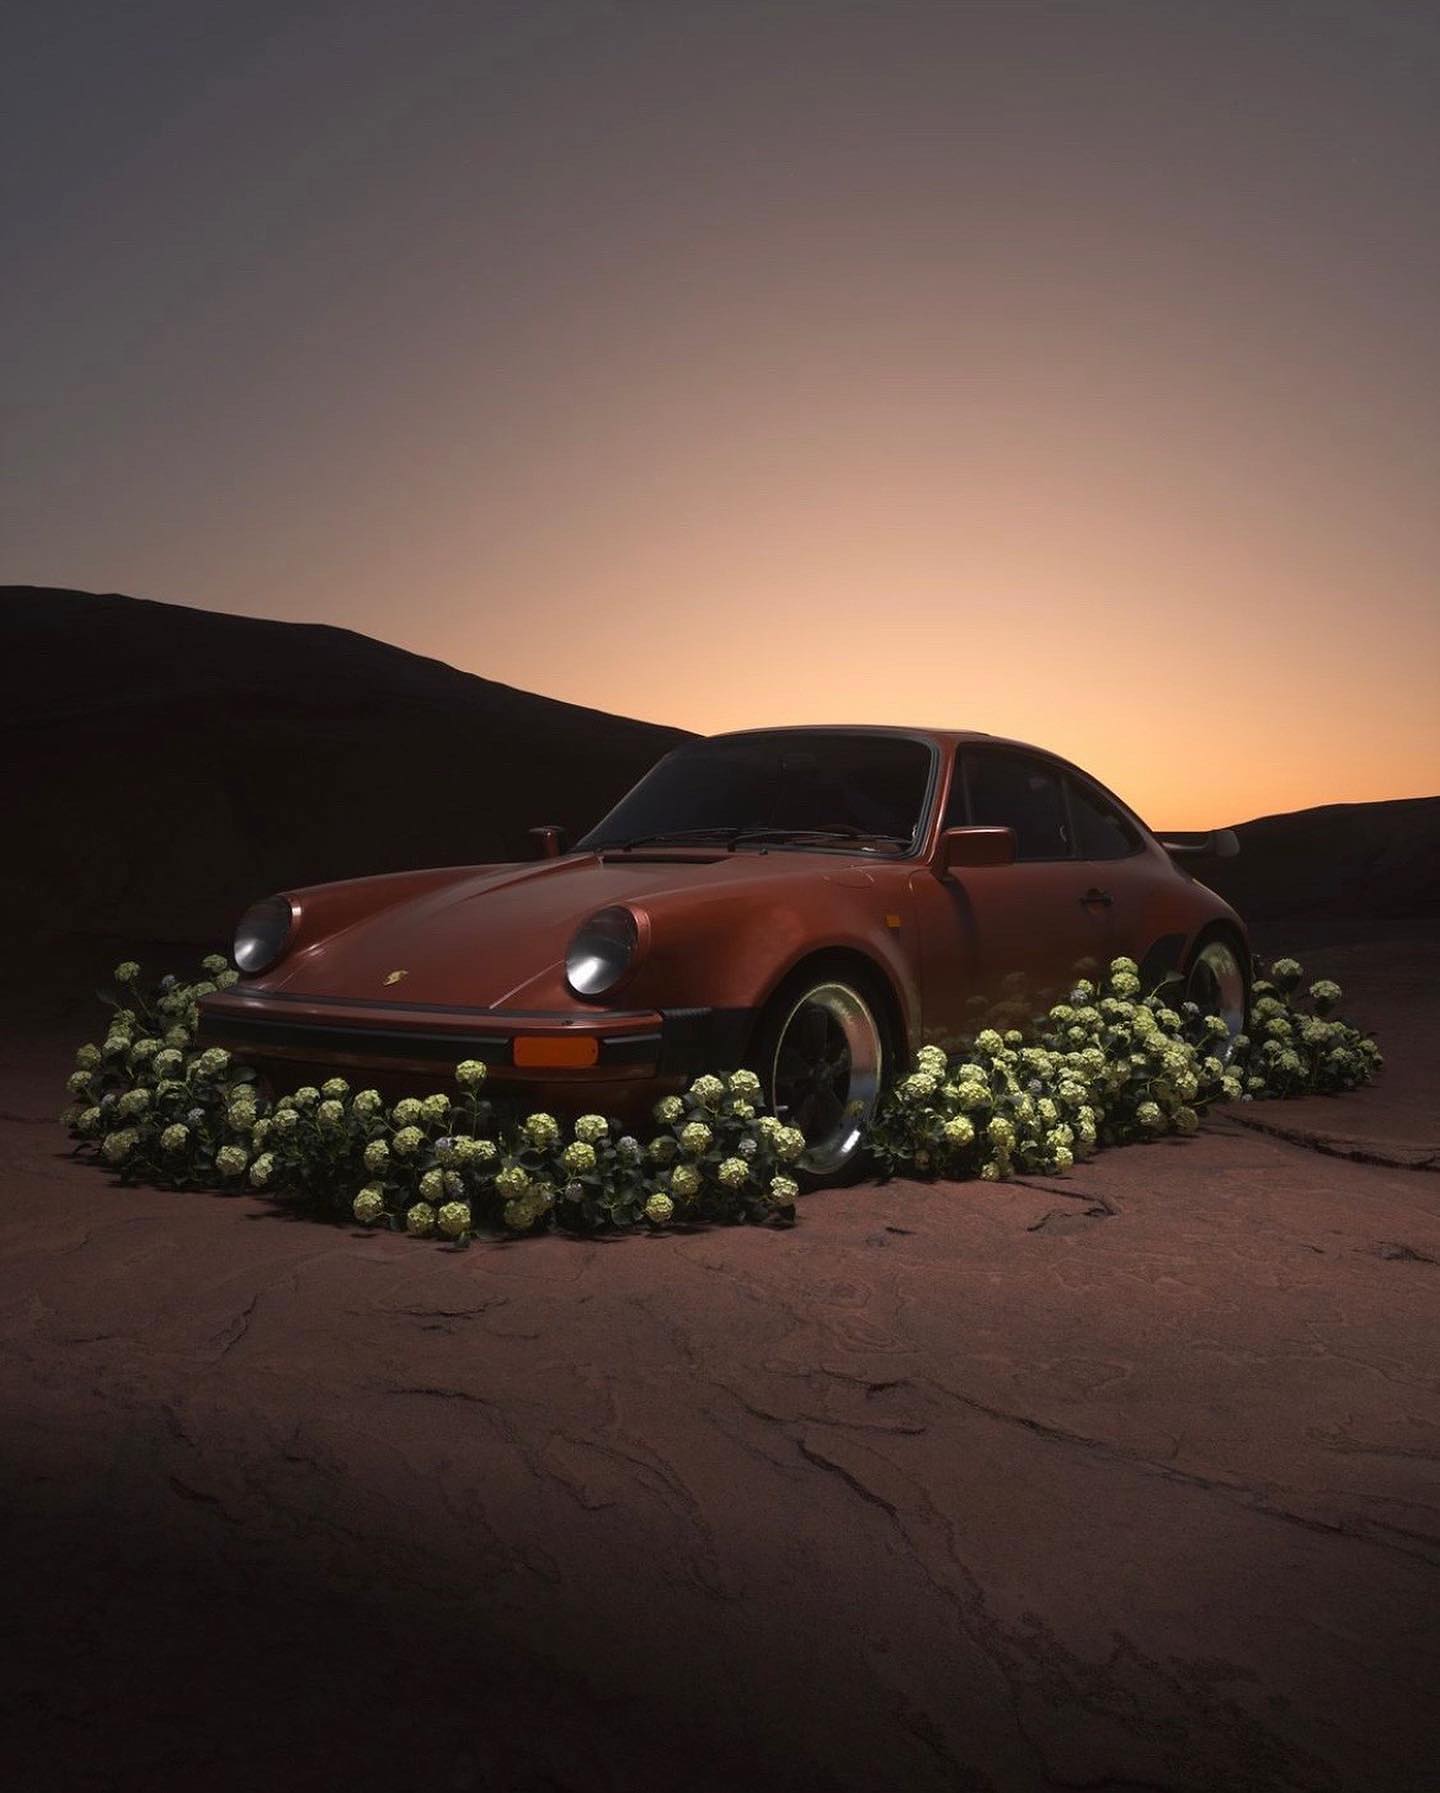 Porsche 930 in desert at dusk, surrounded by flowers